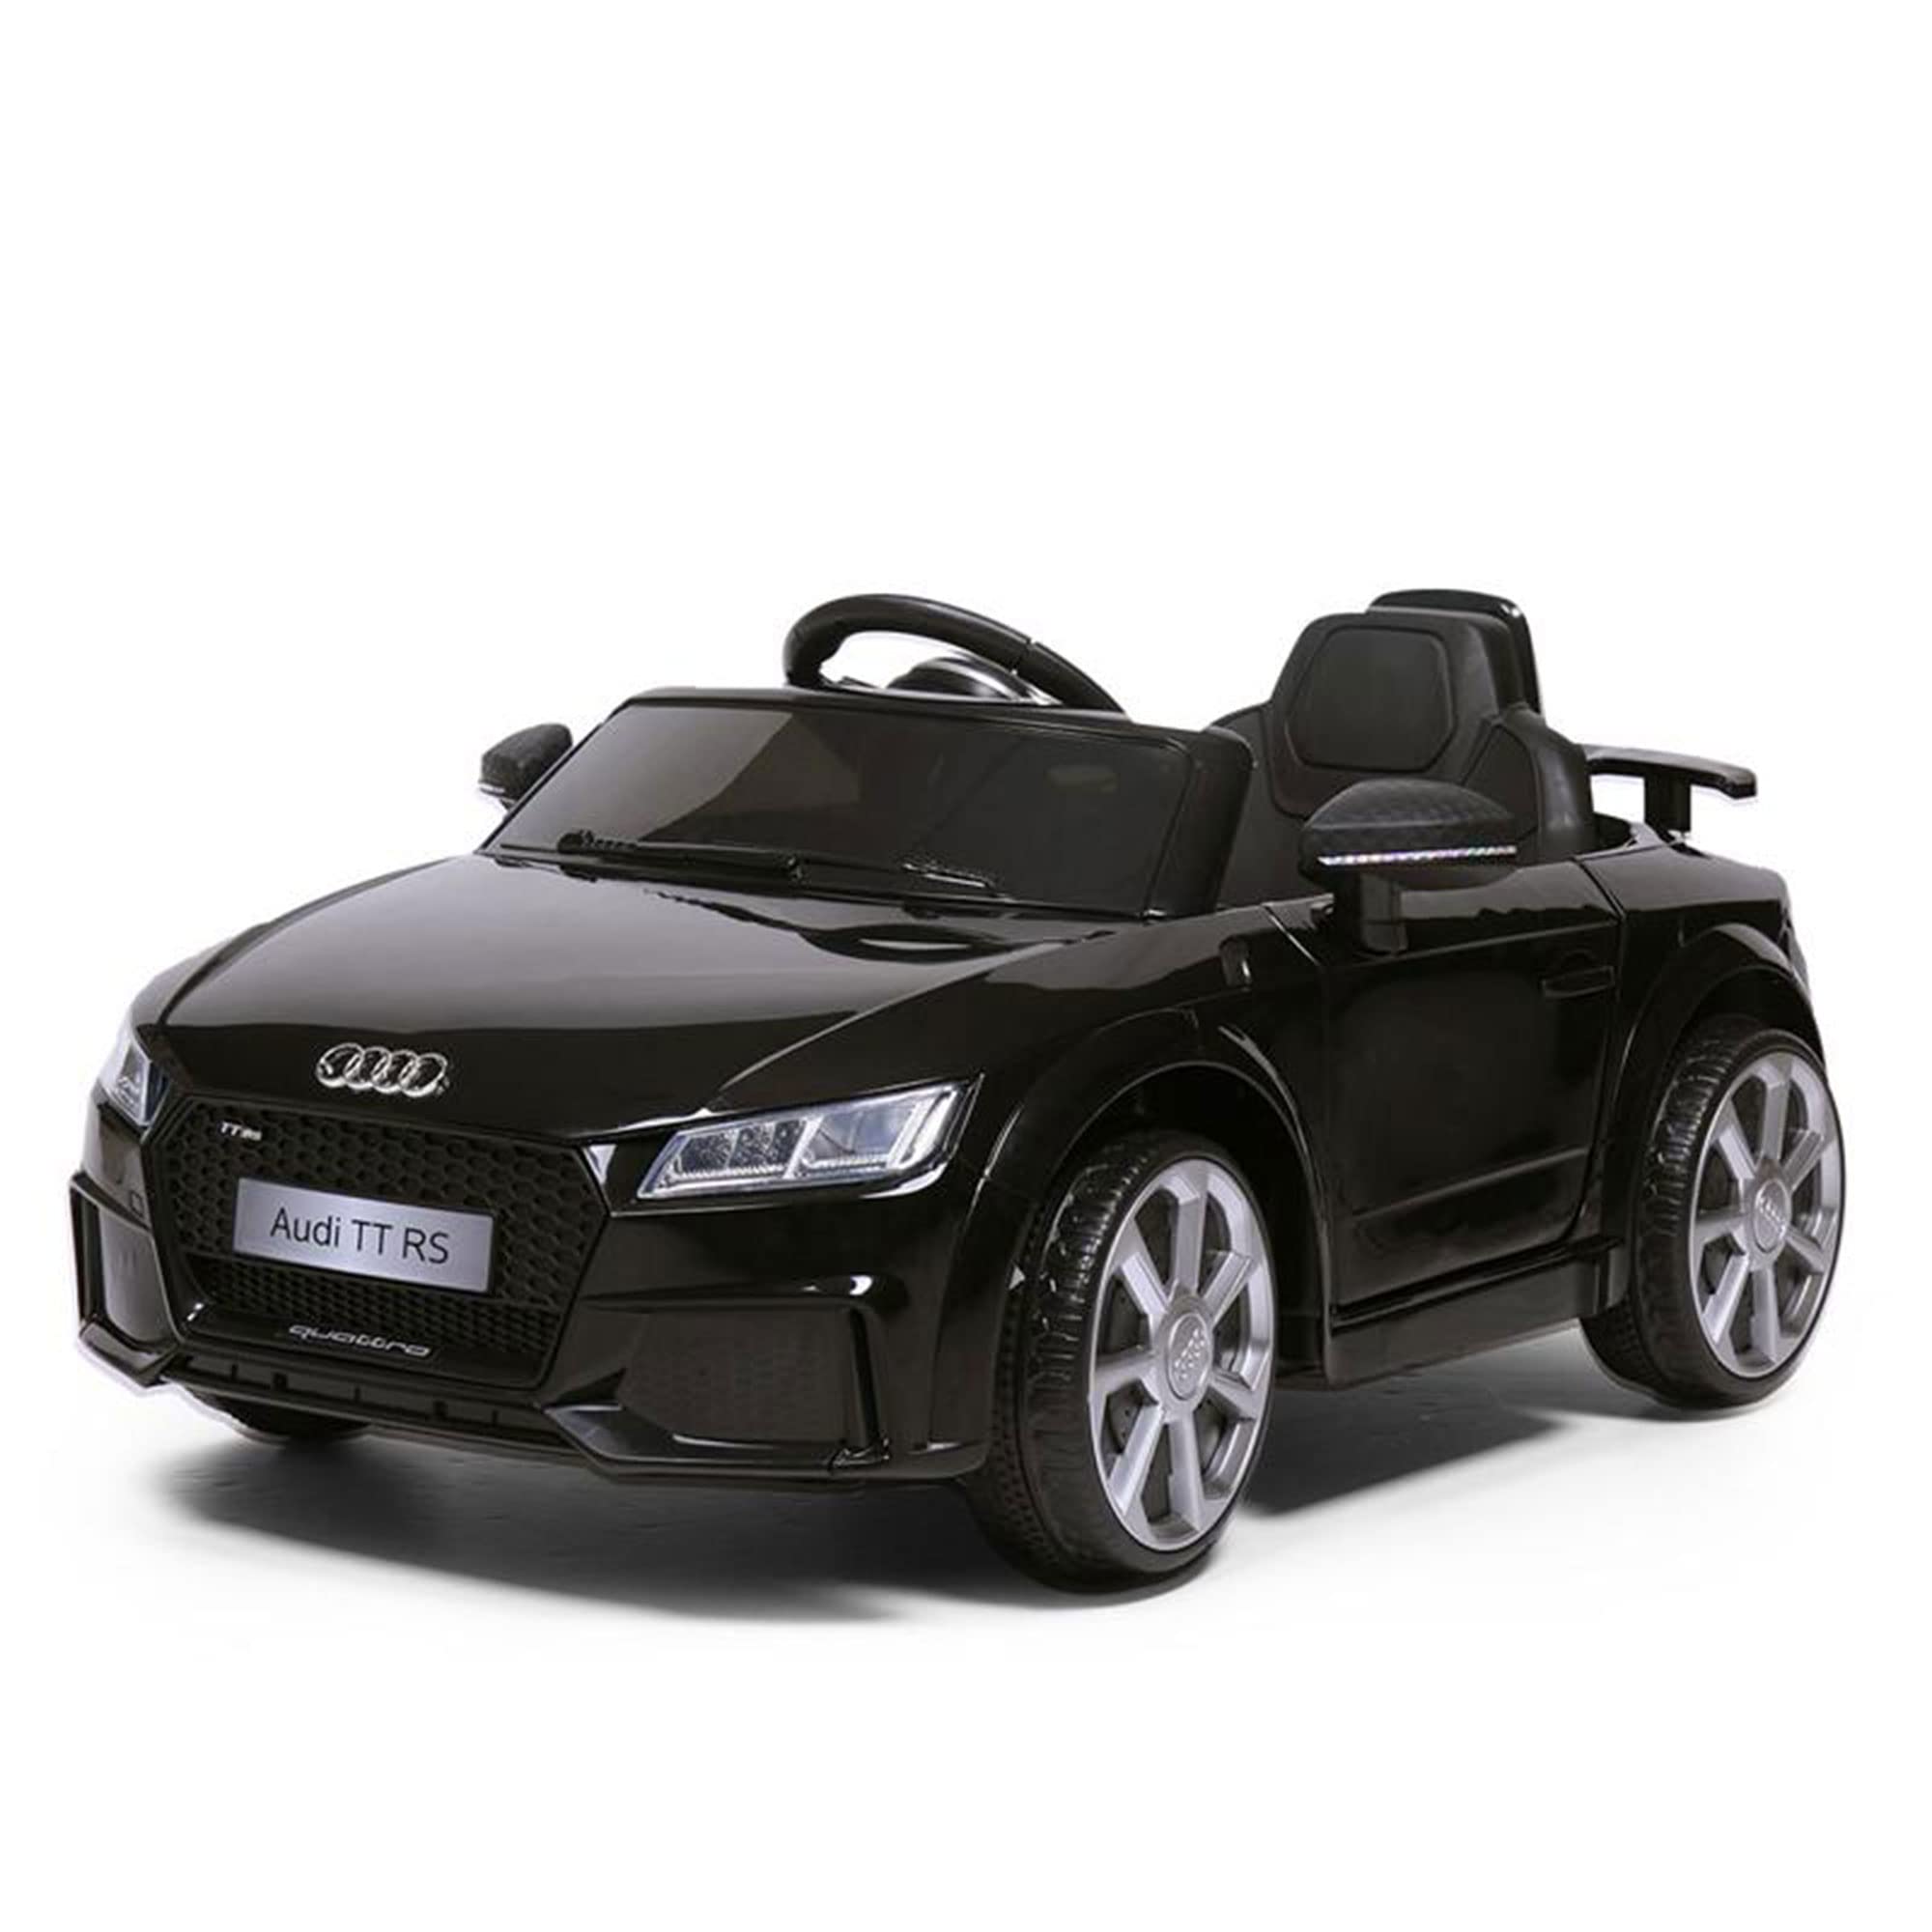 Amazon.com: TOBBI Kids Ride On Car,Audi TT RS Licensed Kids Electric car w/  Battery Powered Car w/2 Motors Remote Control,Music Mp3,Two Doors Open,Play  AUX, for Boys Girls Black : Toys & Games